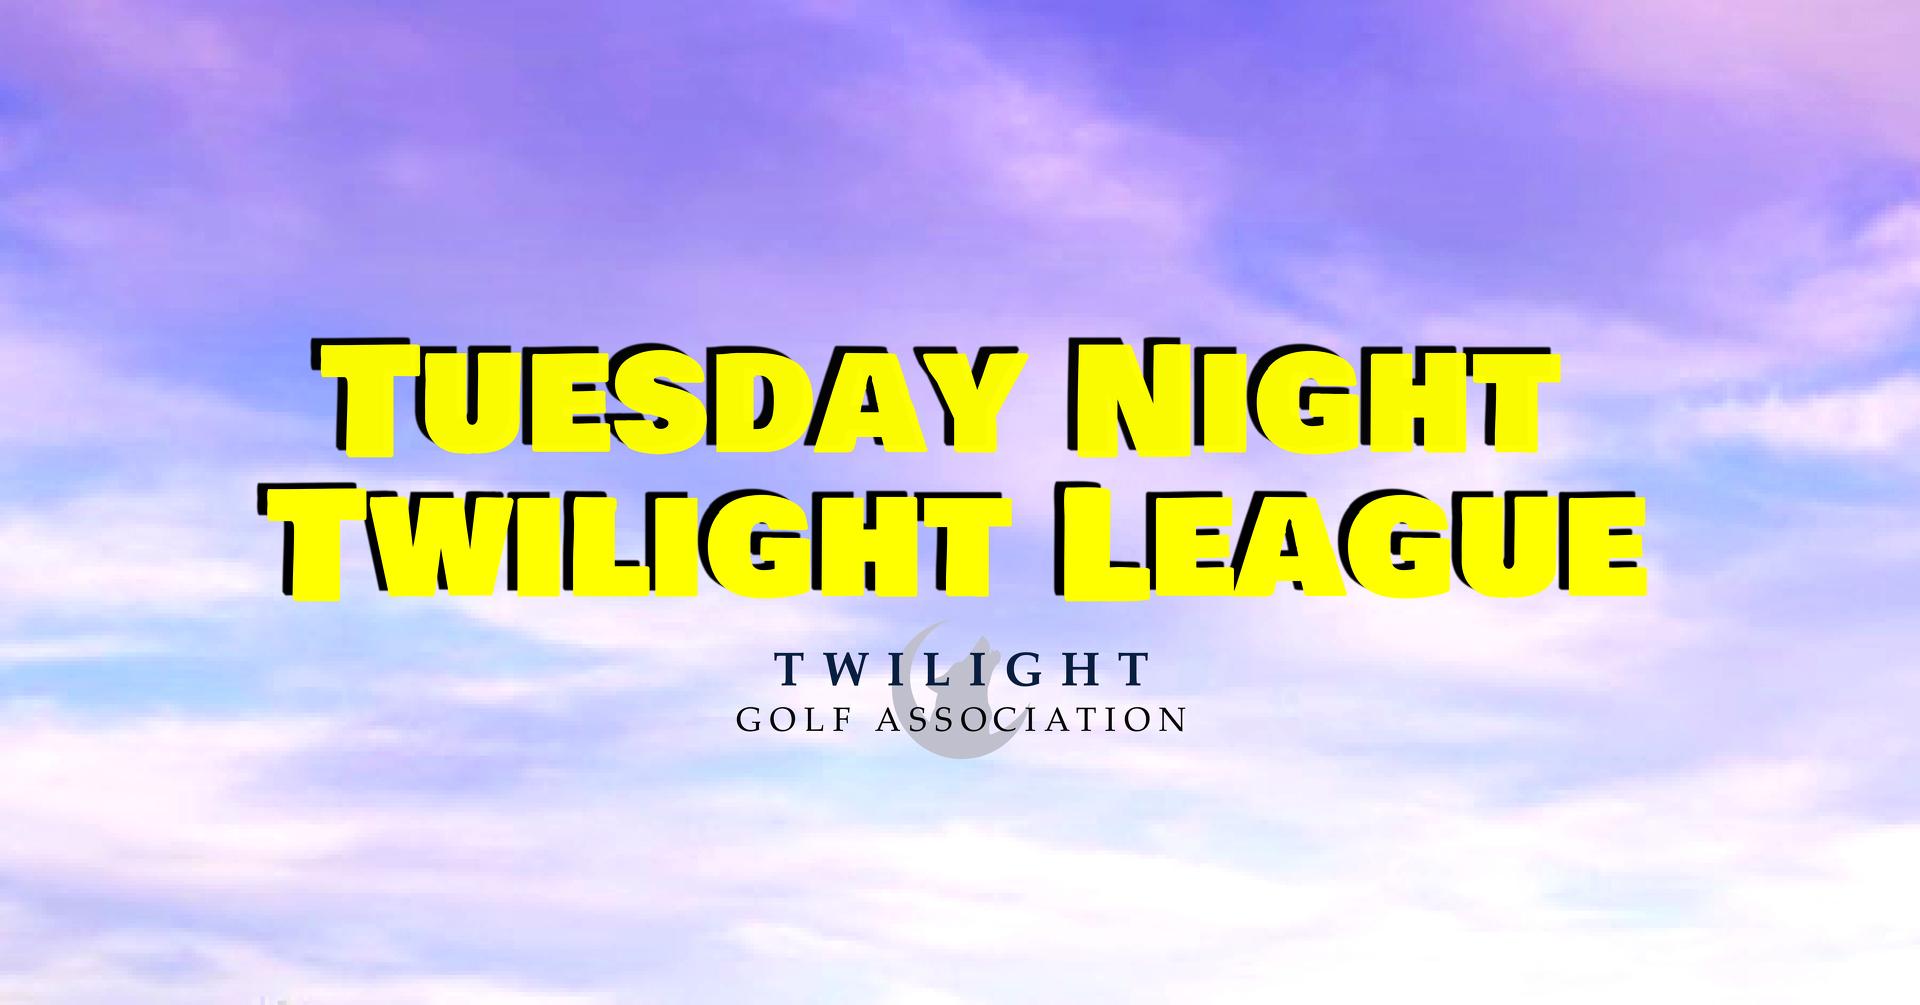 Tuesday Twilight League at Dauphin Highlands Golf Course